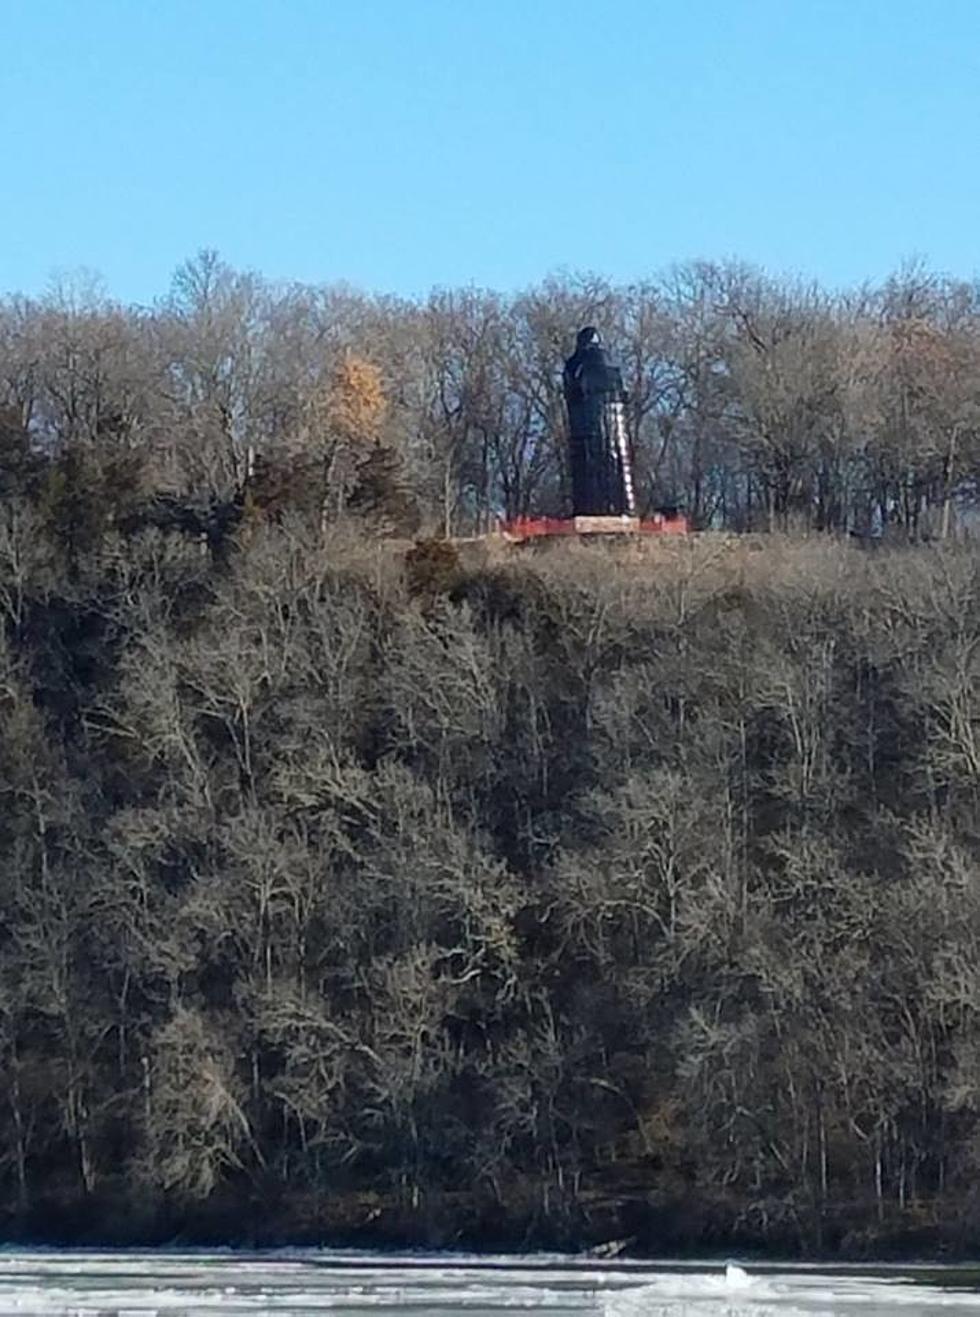 Is Darth Vader Watching Over the Rock River?